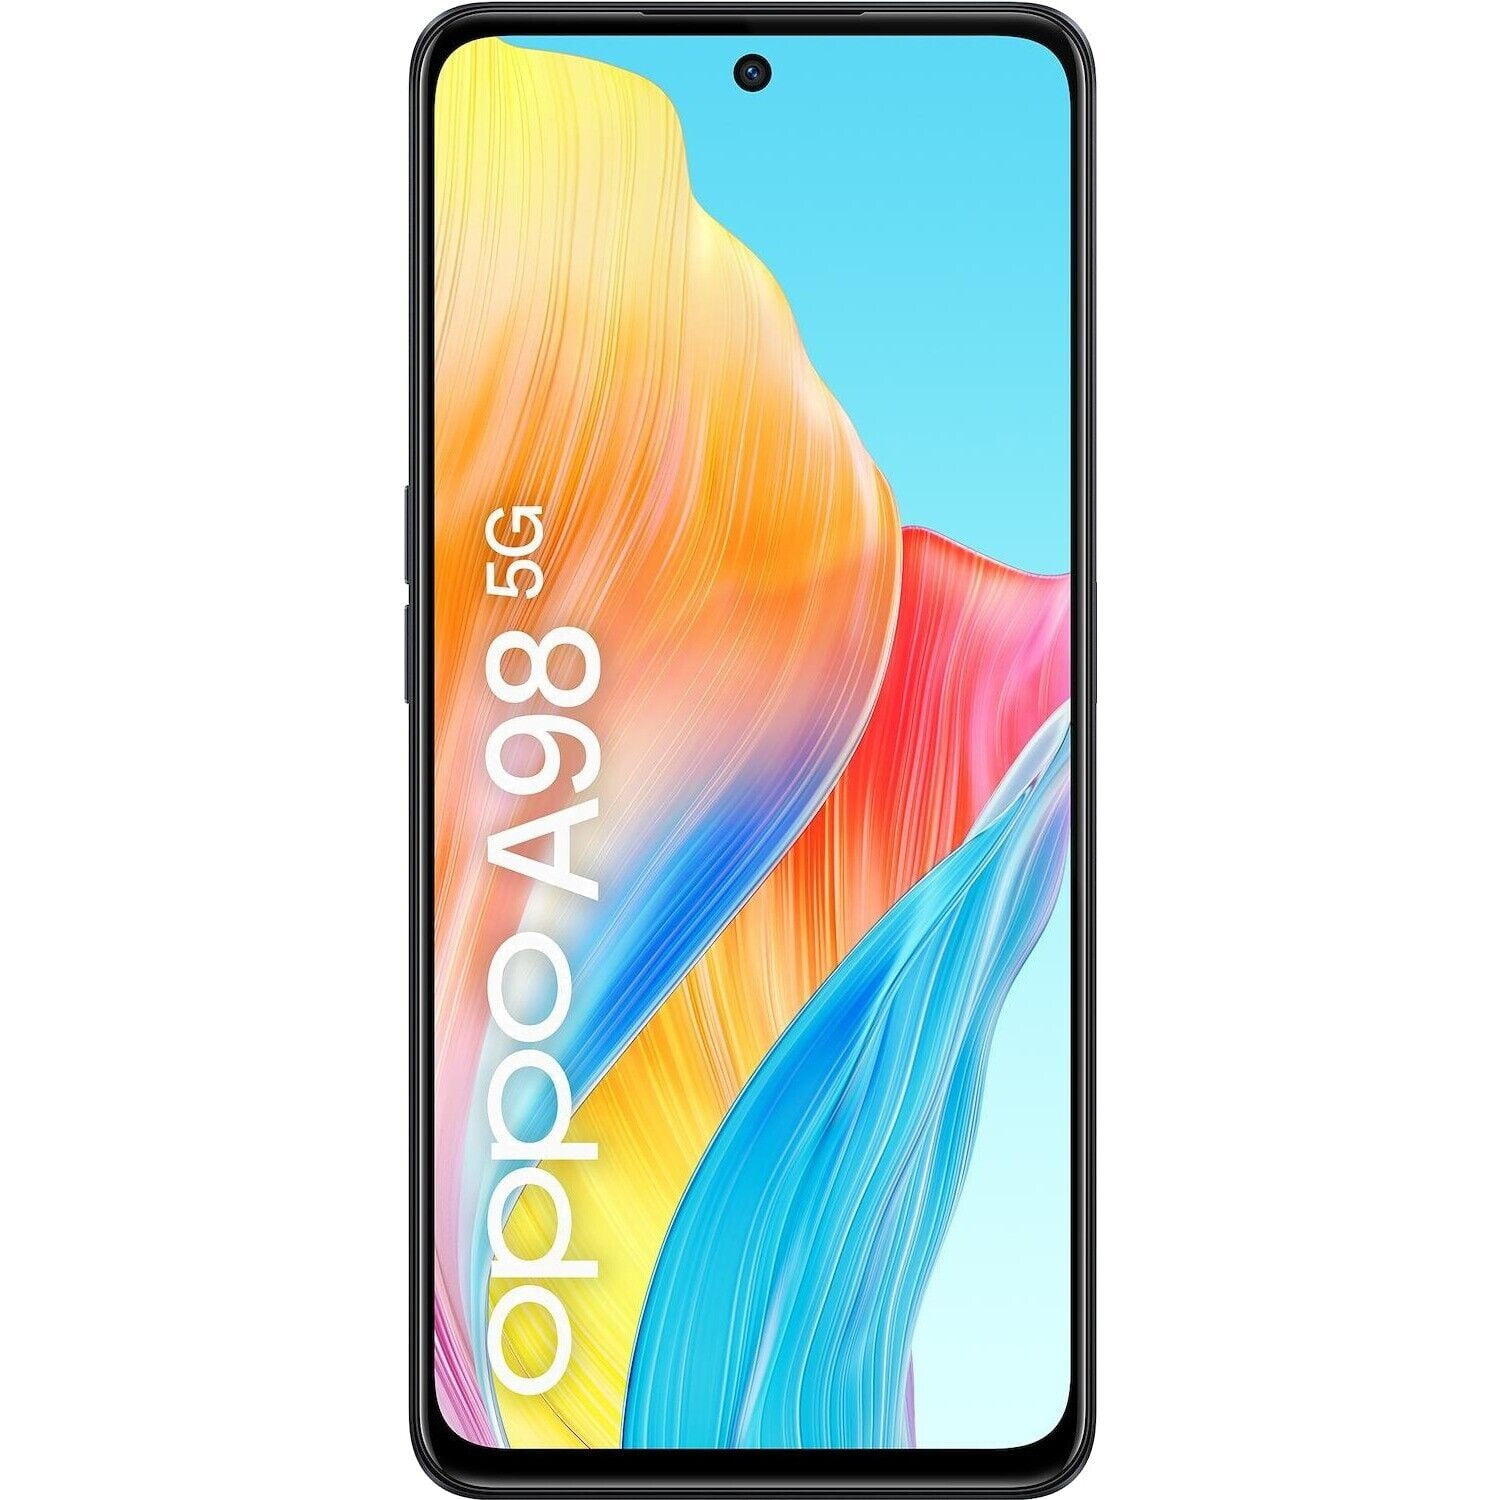 OPPO A98 5G l 8(+8)GB Extended RAM + 256GB ROM l 120Hz Silky Smooth Large  Screen l 64MP AO Camera l 5000mAh Battery